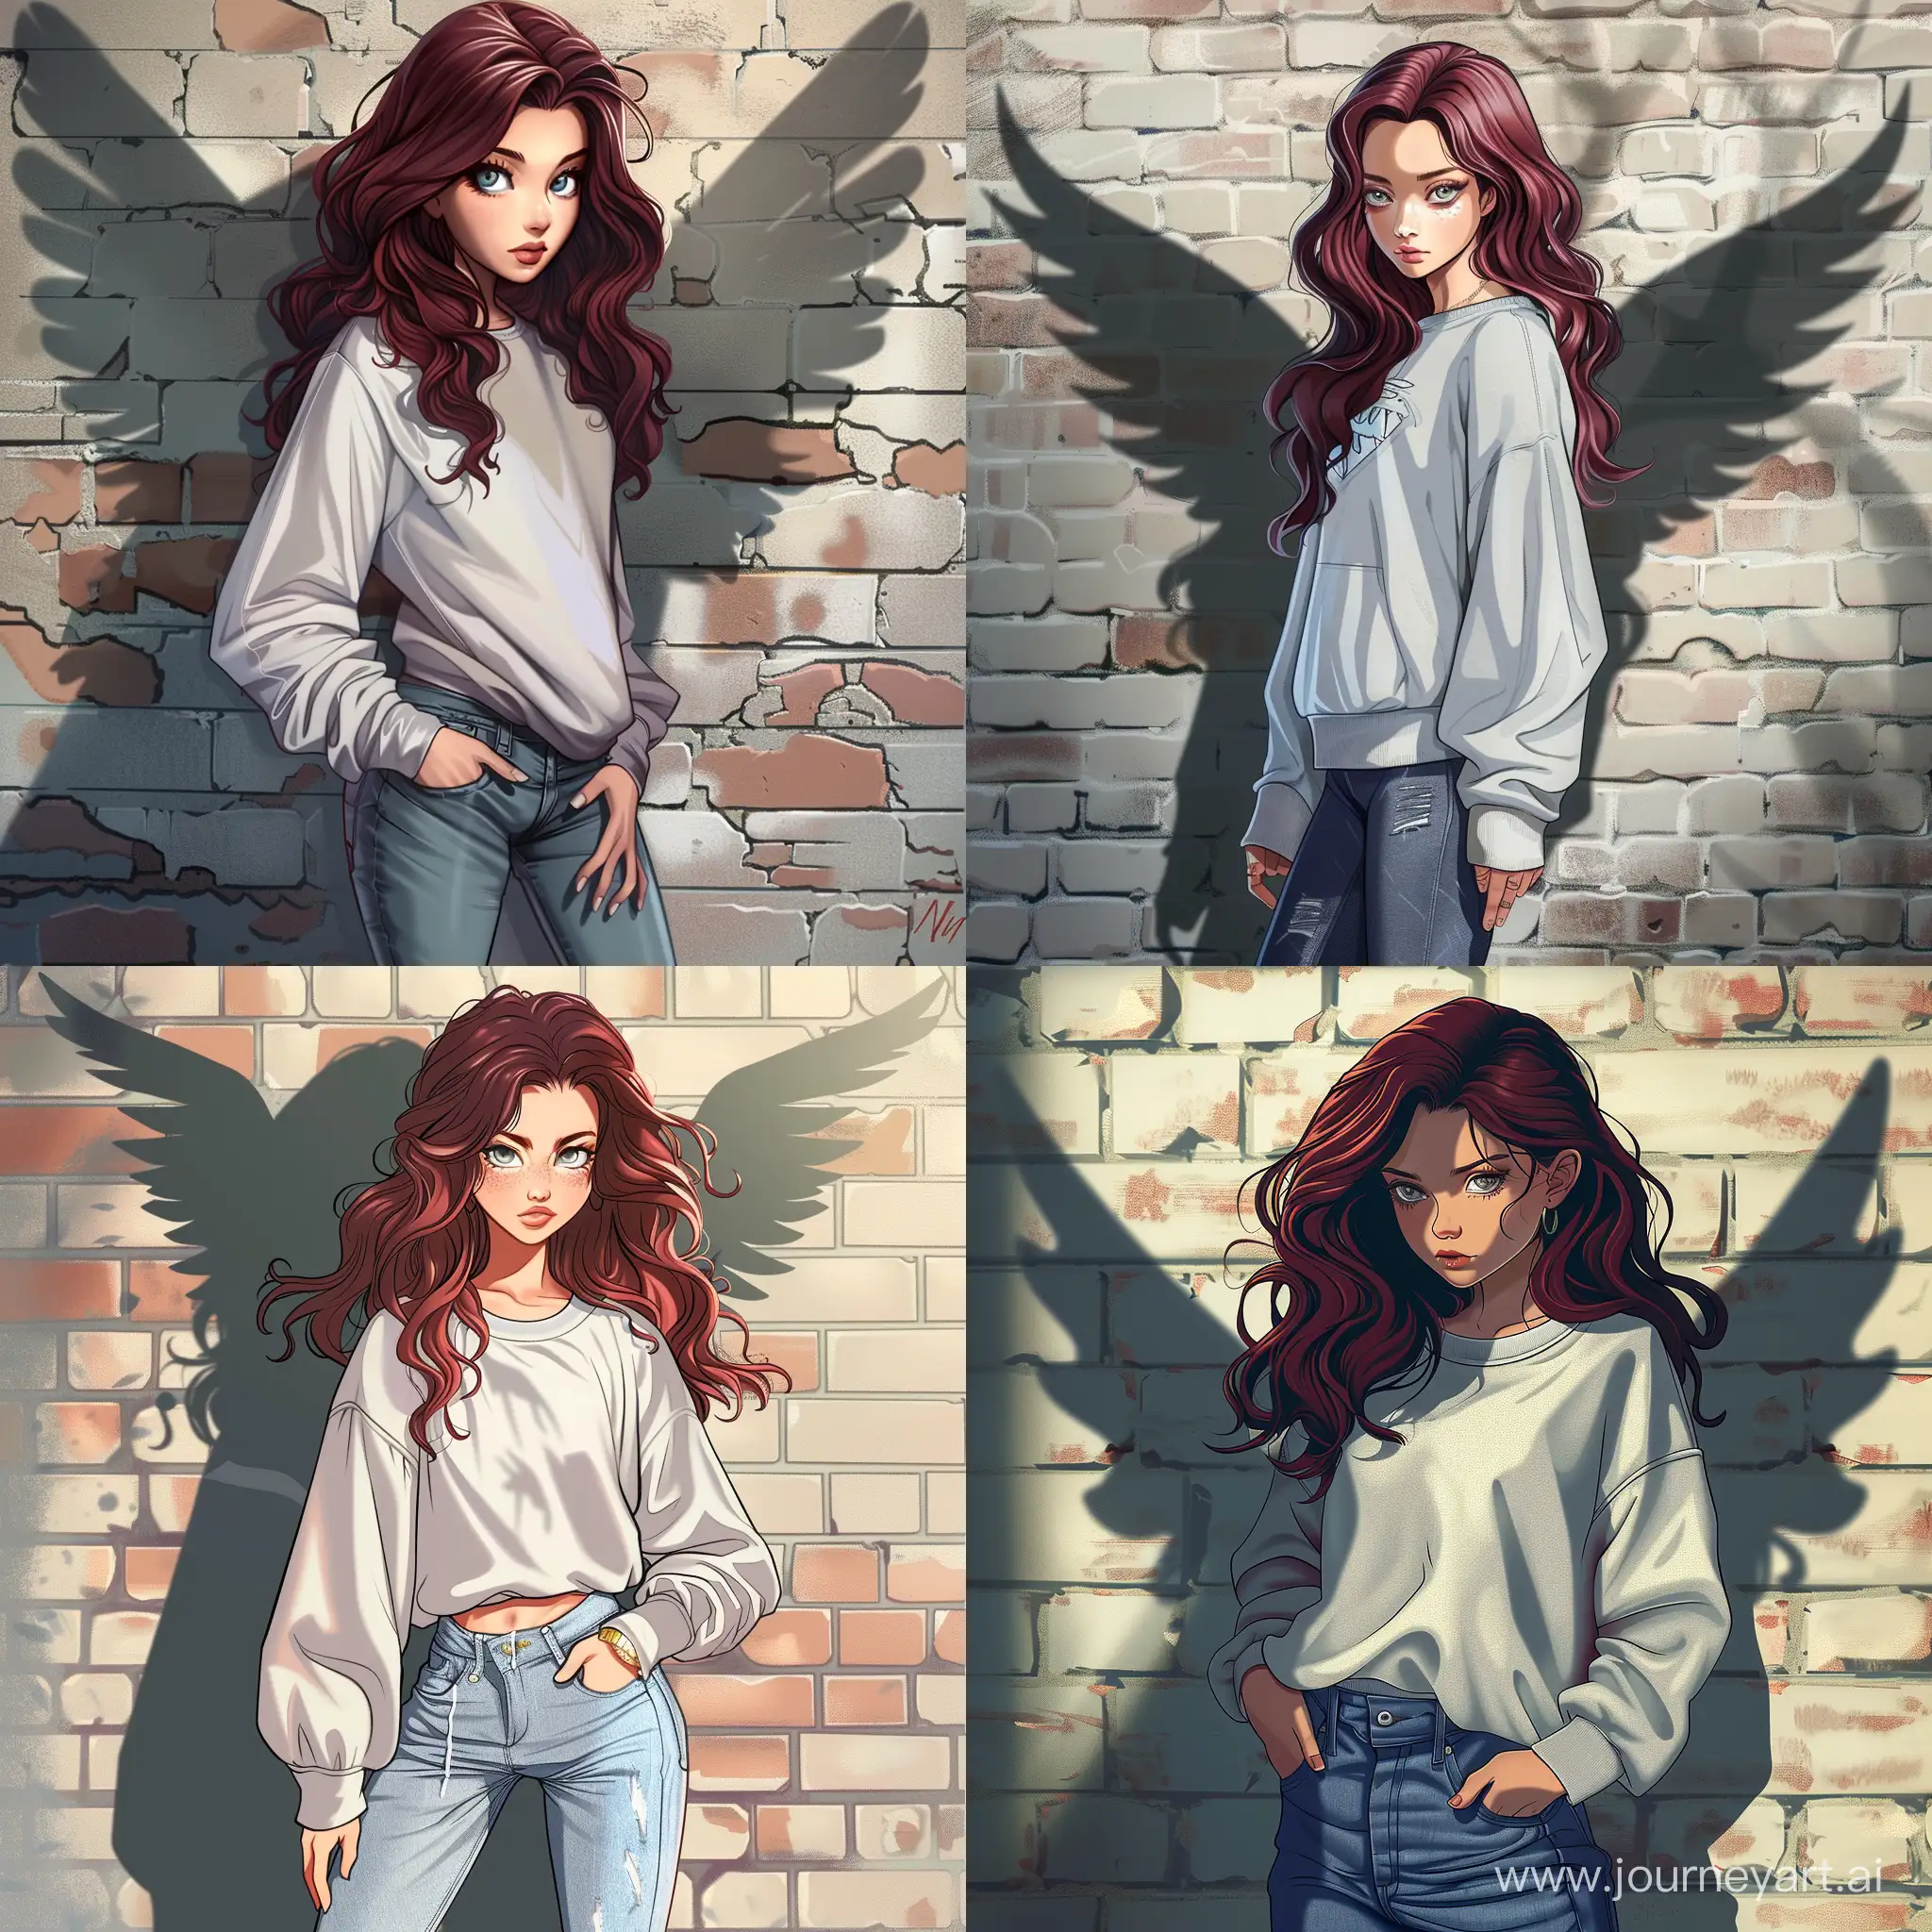 Teenage-Girl-with-Wavy-Dark-Red-Hair-and-Oversize-Sweatshirt-against-Brick-Wall-with-Shadow-of-Wings